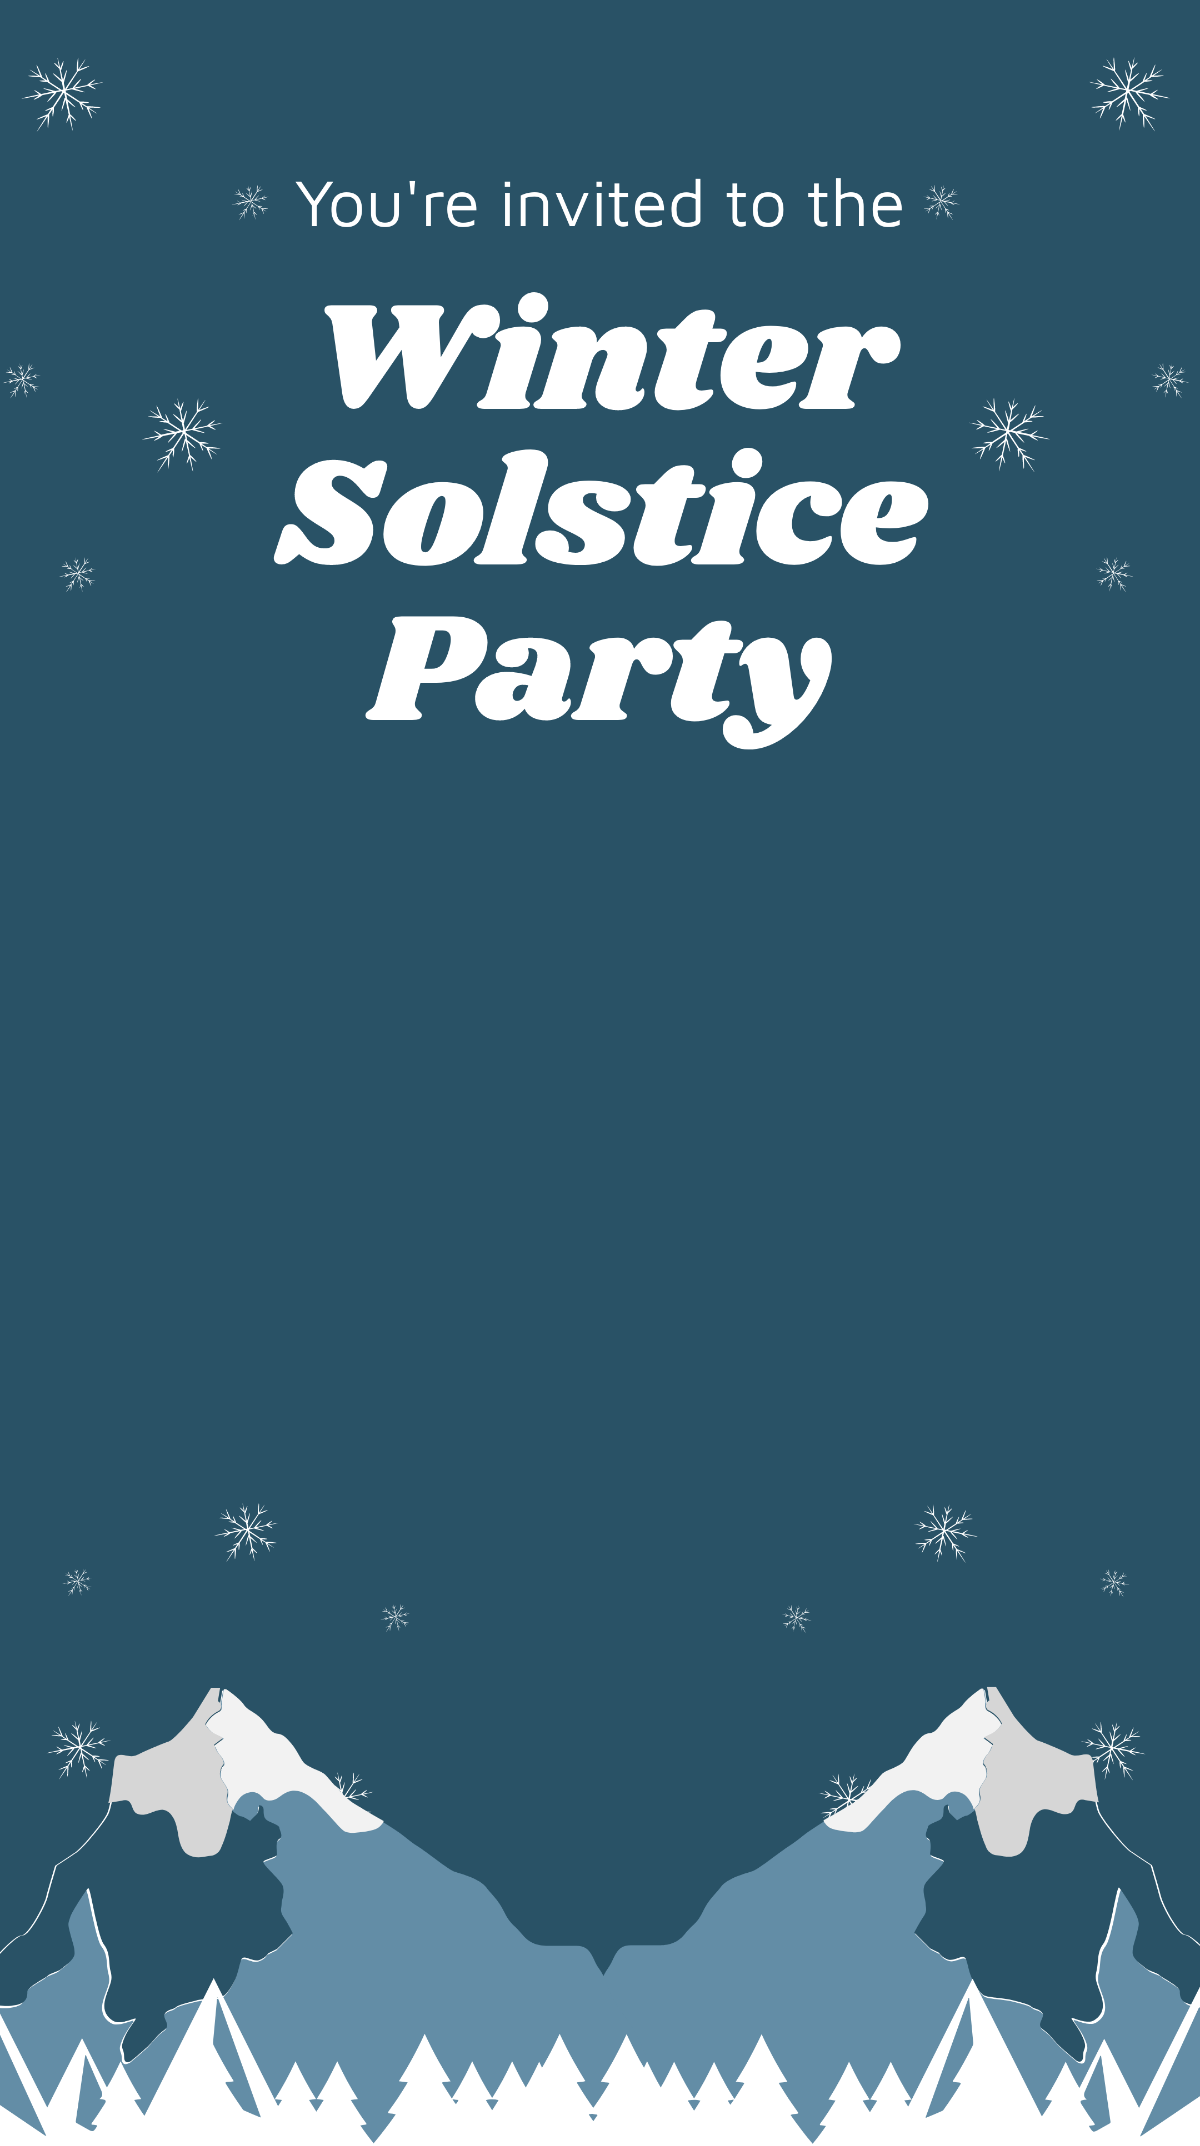 Winter Solstice Party Snapchat Geofilter